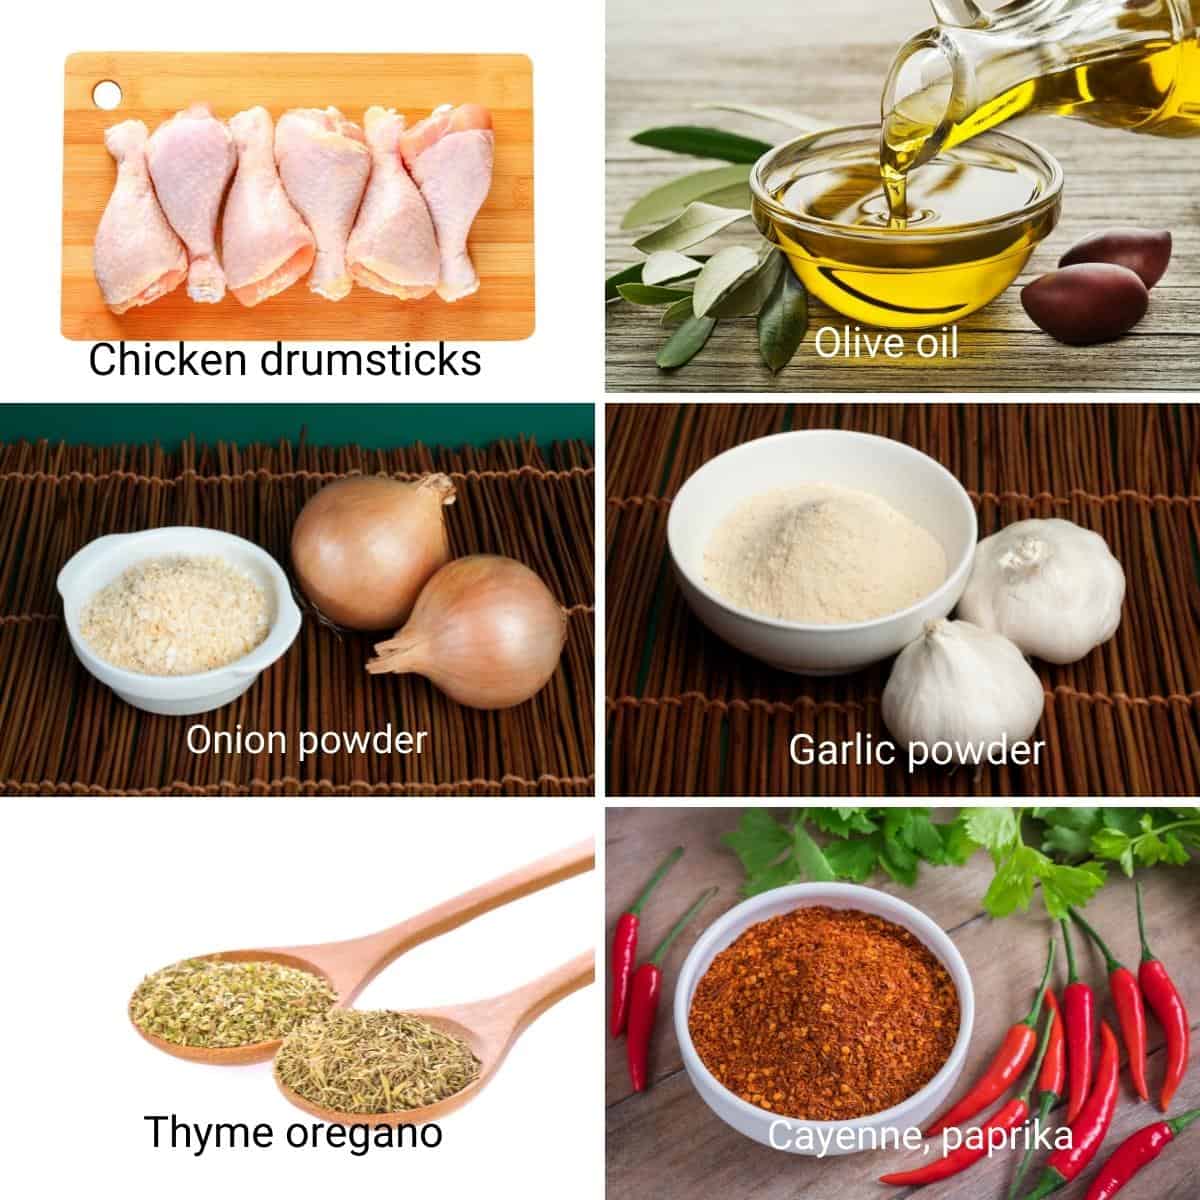 Ingredients to make baked chicken legs.